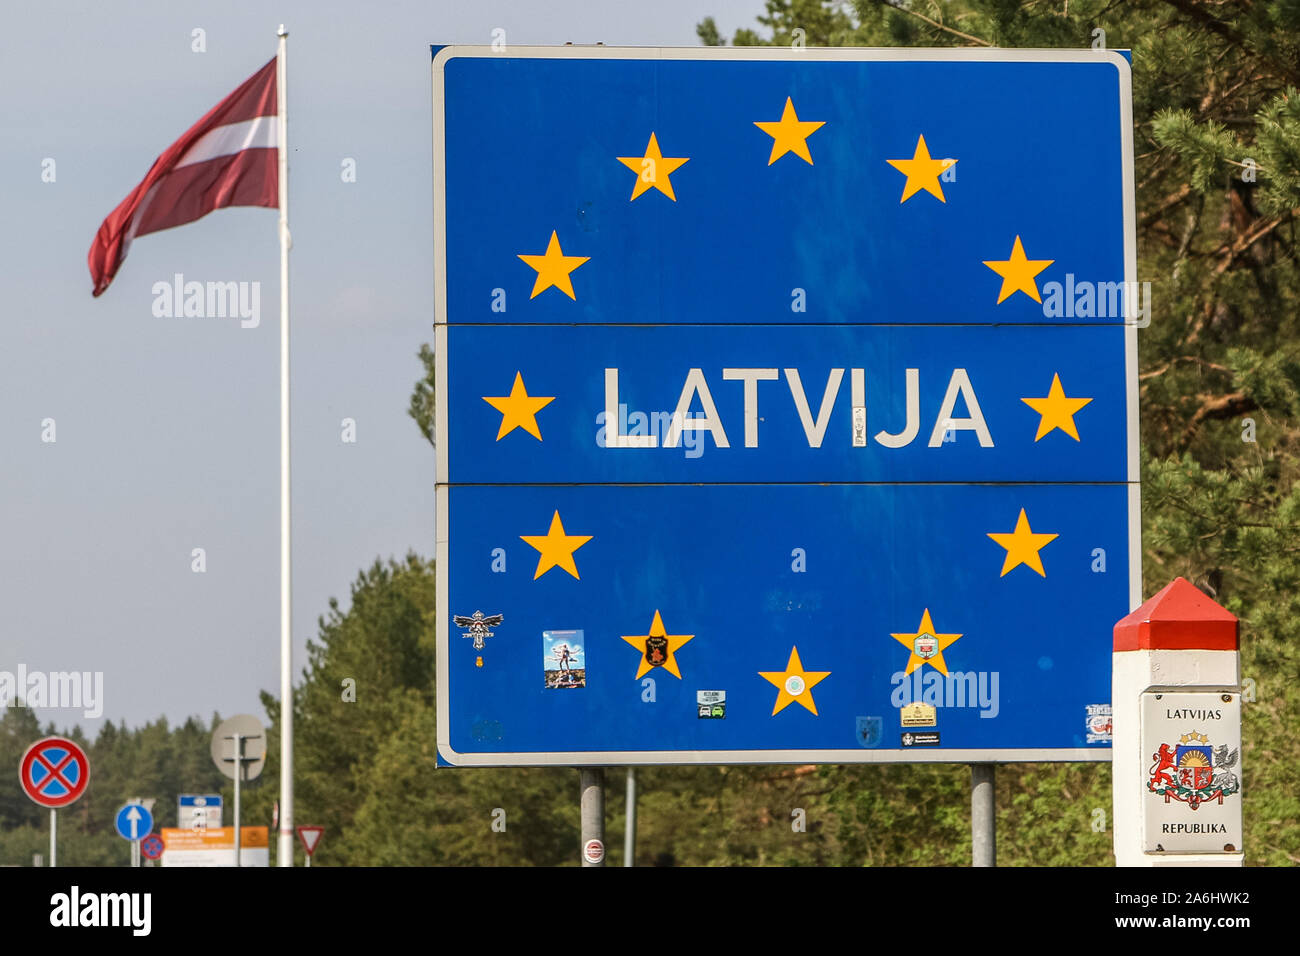 Latvia inscription on a sign with EU stars with with a Latvian flag in the  background is seen on a Lithuania - Latvia Schengen Area border crossing  Butinge (LT) - Rucava (LV)